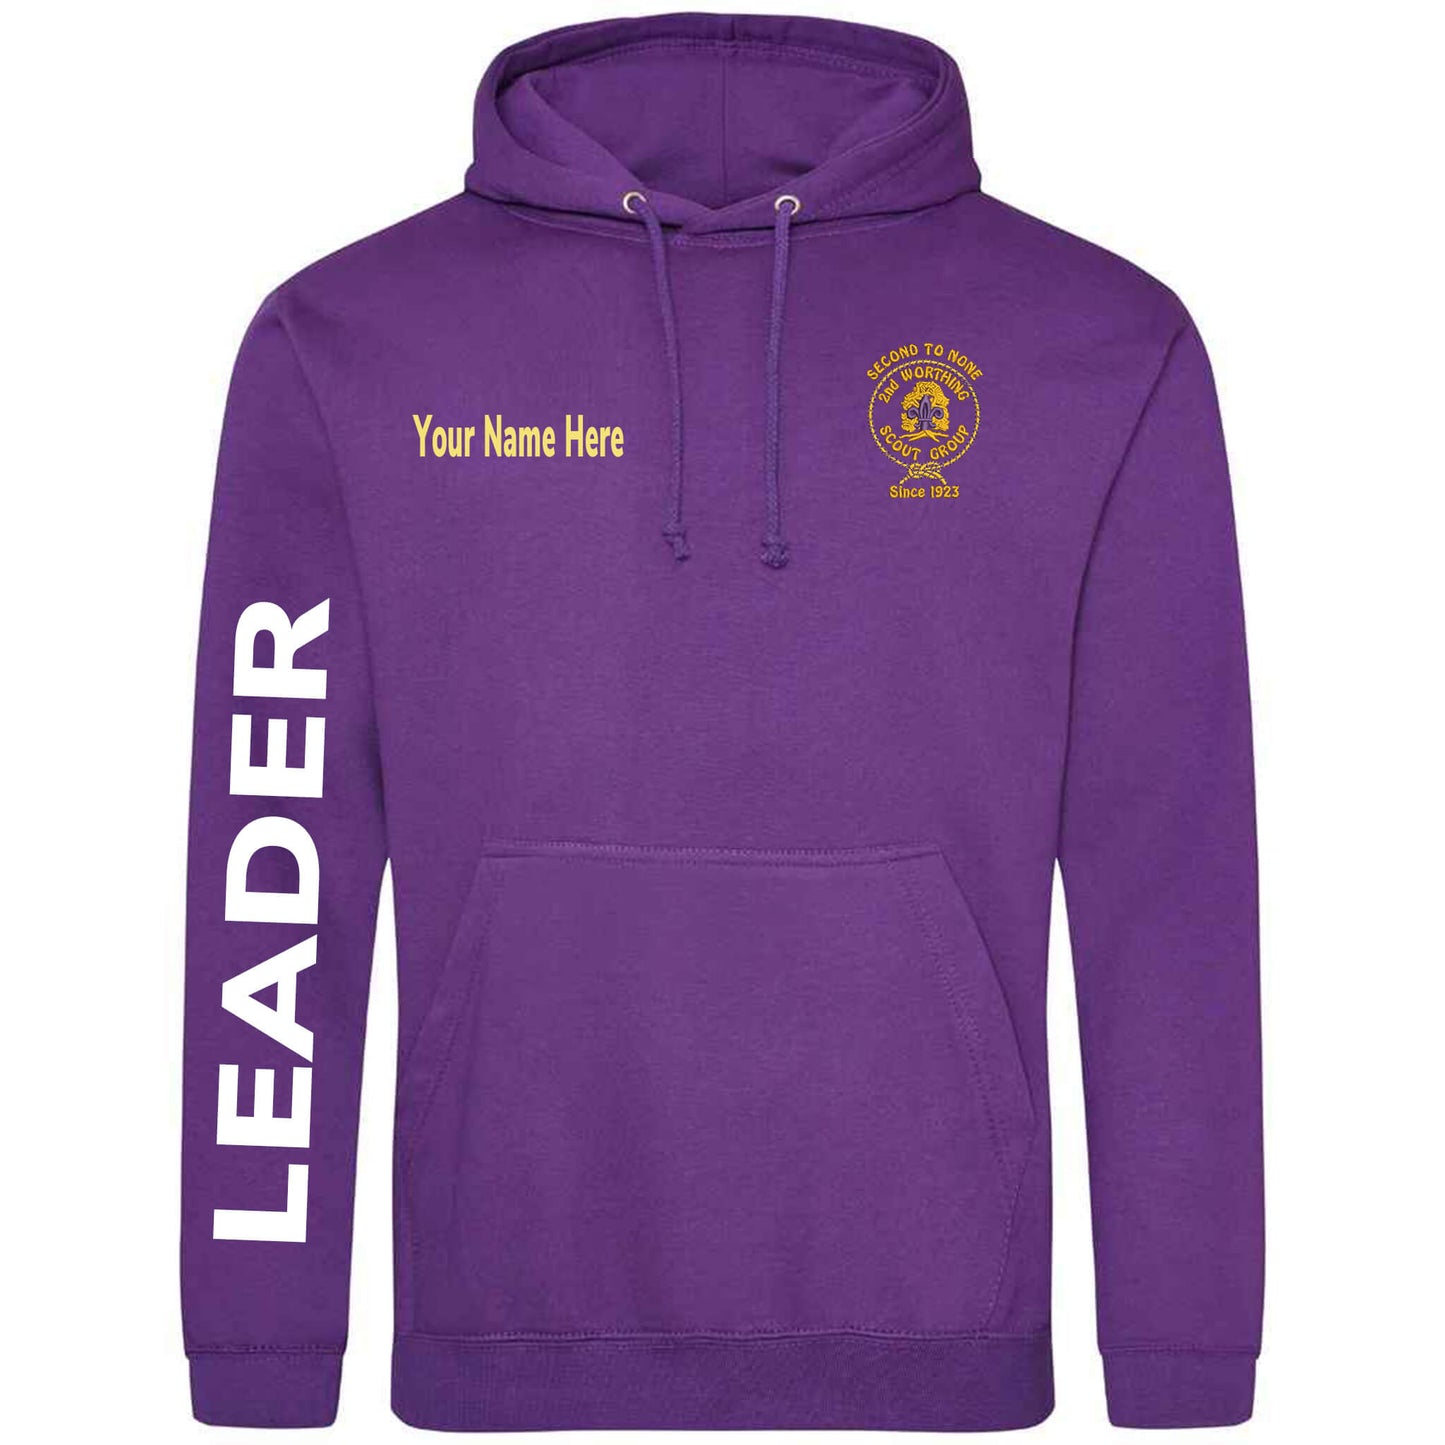 2nd Worthing Scouts Leaders Embroidered Hoodie